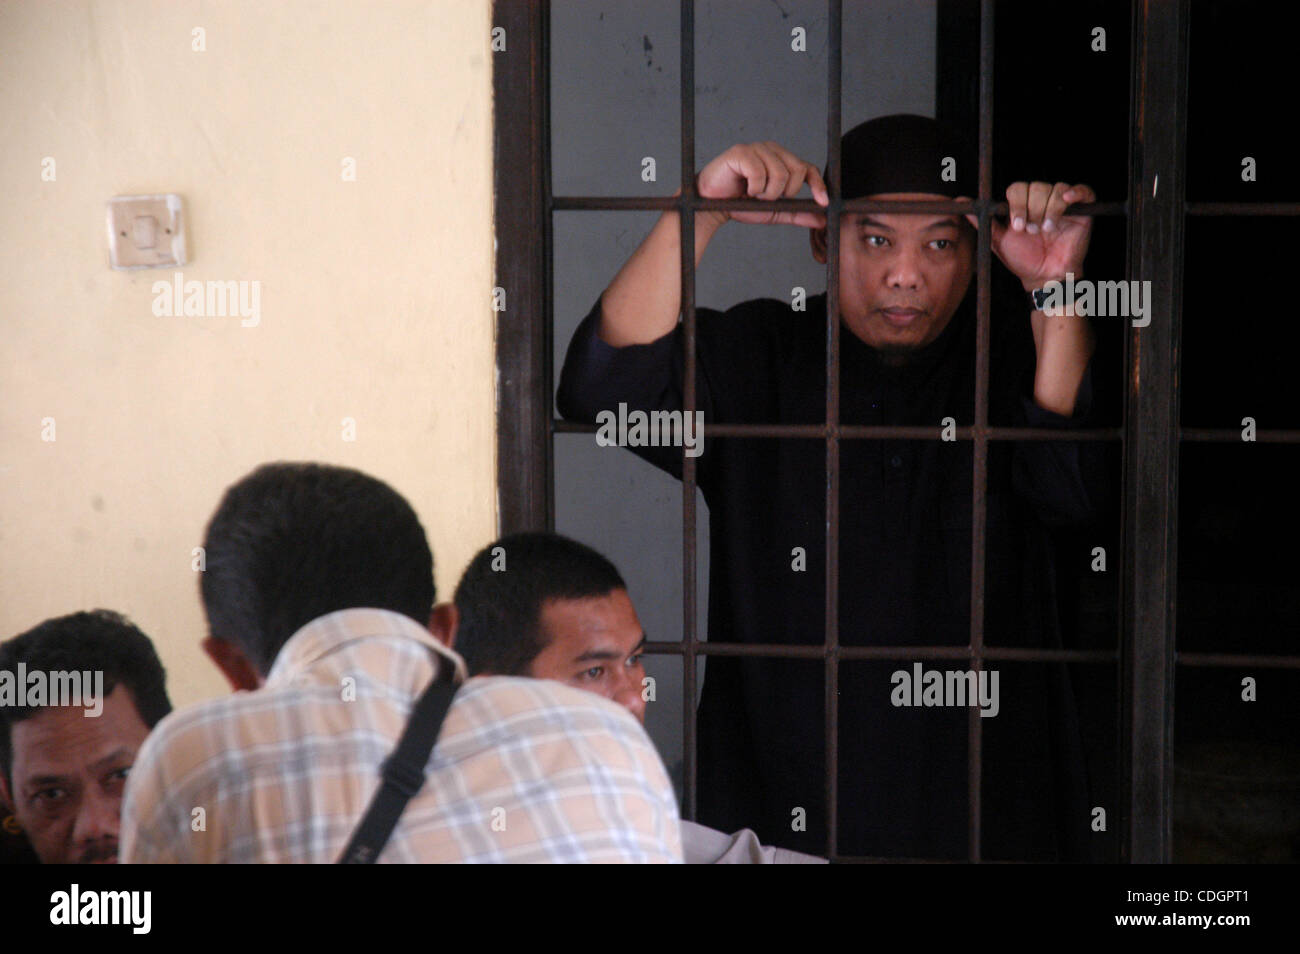 Mohammed Sofyan Tsauri, an Indonesian police officer who quit the force to become a terrorist, listens as judges read their verdict at Depok-West Java court, January 19, 2011. The court sentenced Tsauri, who was affiliated to Al-Qaeda and had trained about 170 militants to wage jihad (holy war), to  Stock Photo